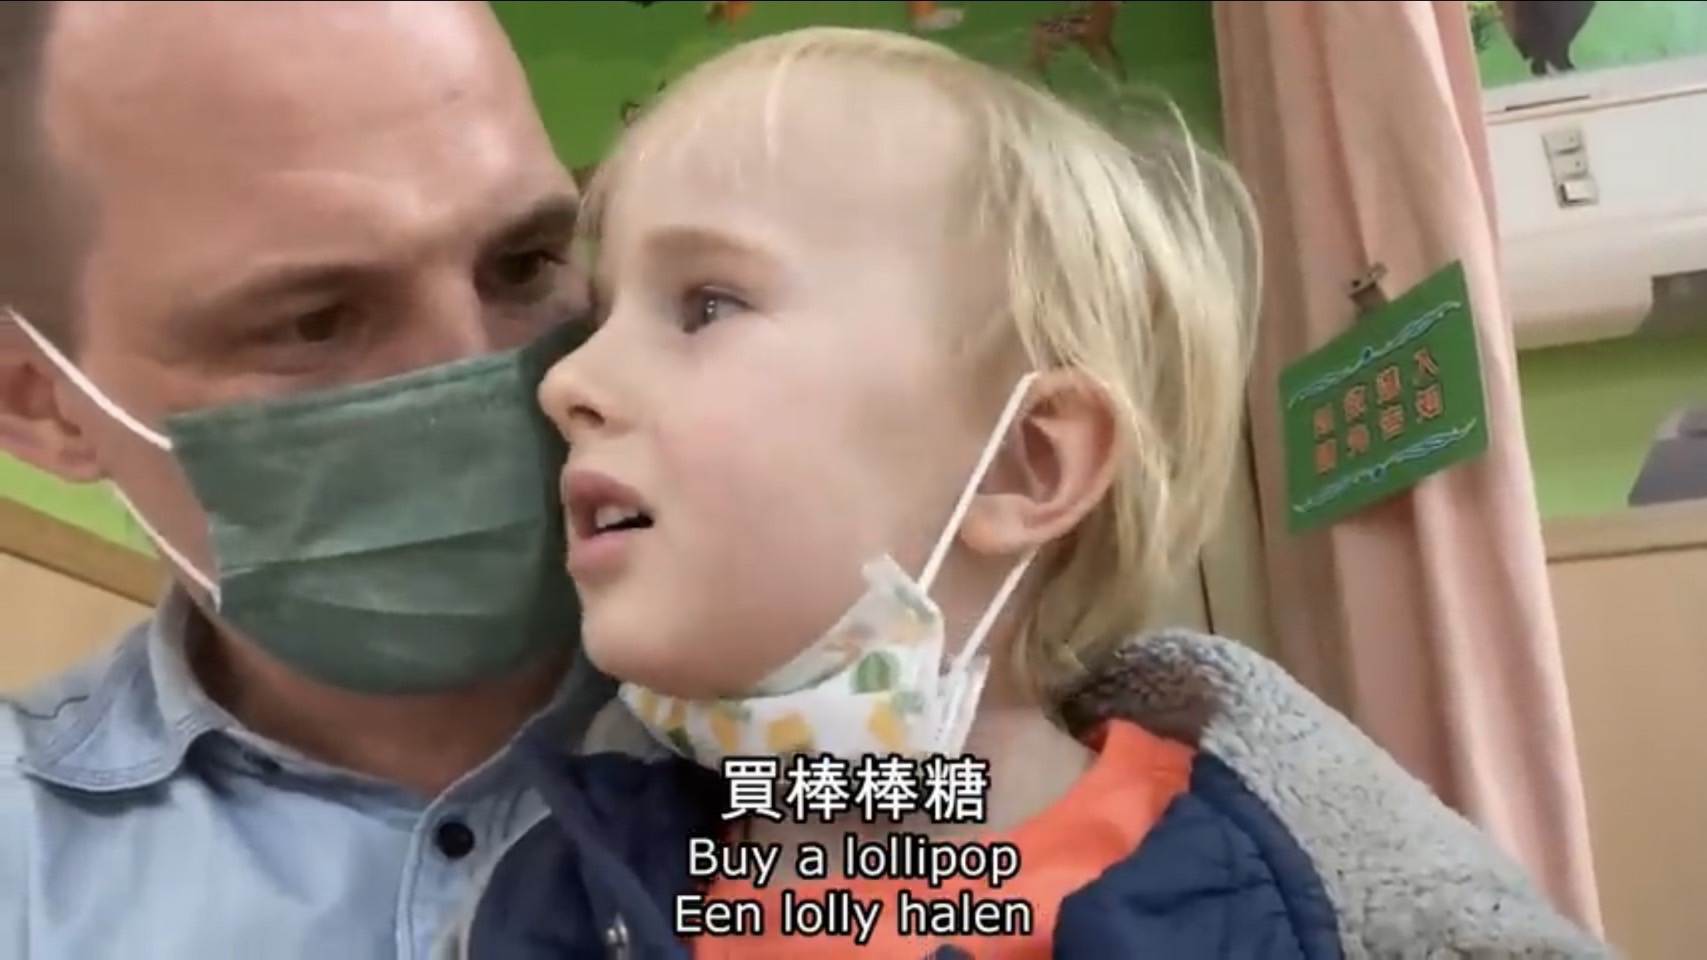 Dutch new immigrant family deeply experience and praise Taiwan's medical and health insurance system.  Photo authorization from：荷蘭人在台灣Willemsen in Taiwan 